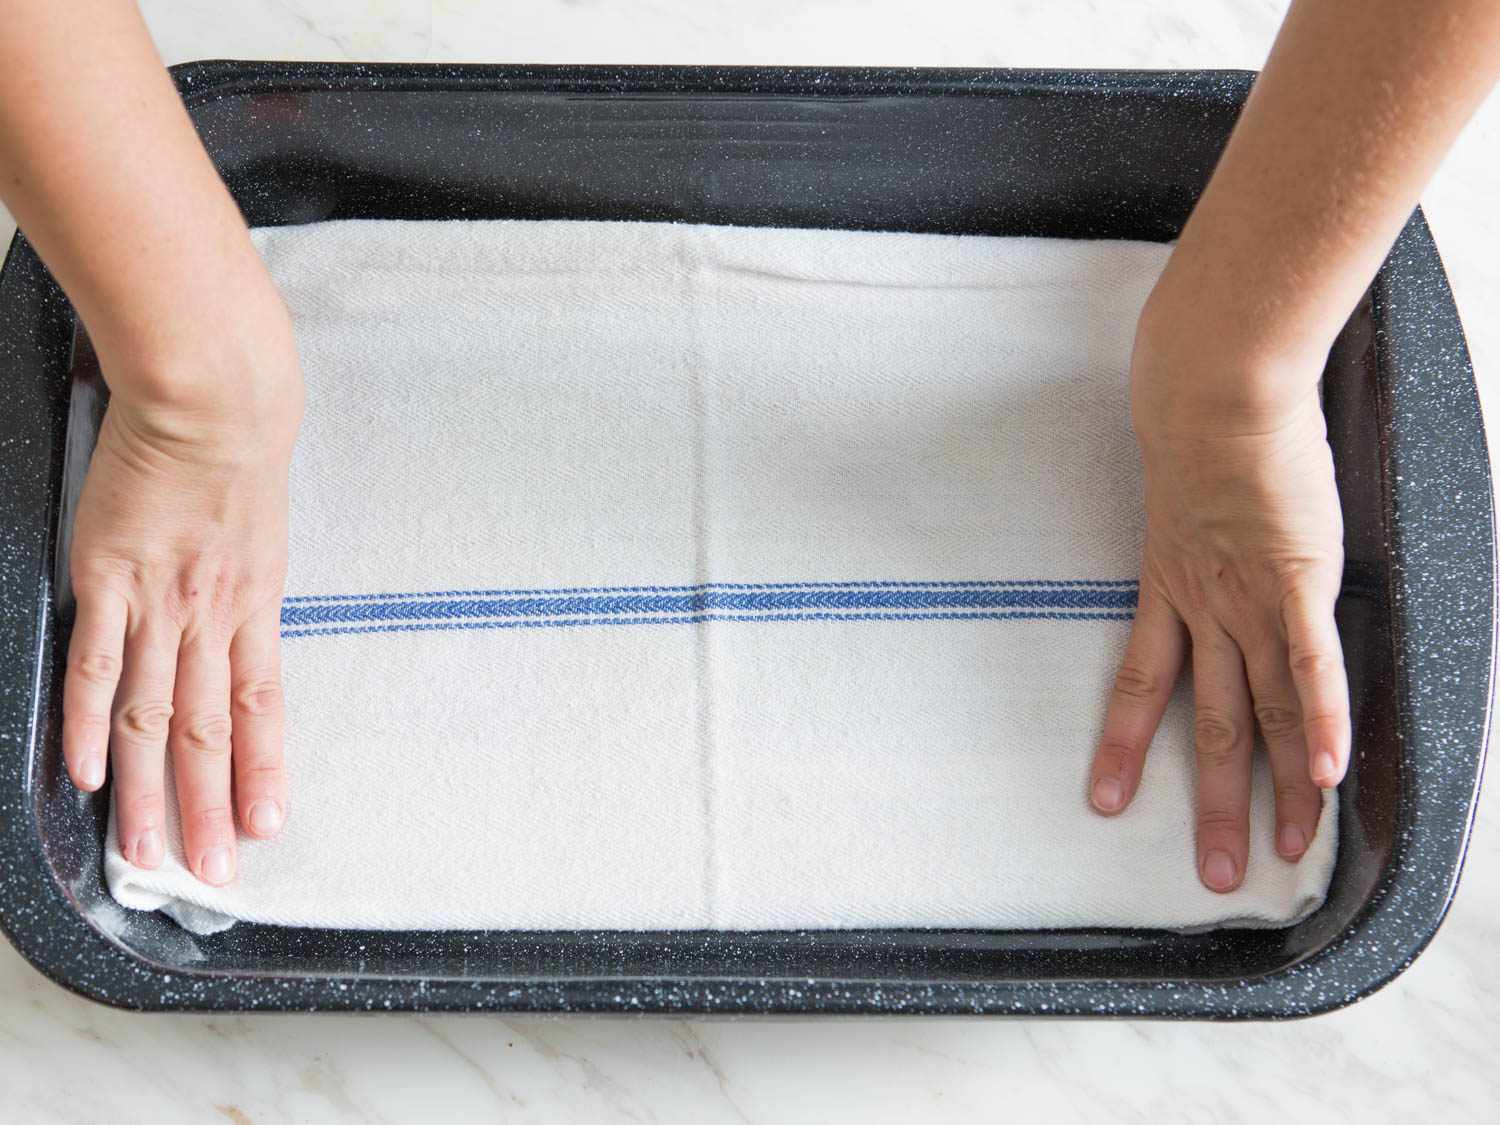 A blue and white cotton towel being placed into the bottom of a roasting pan